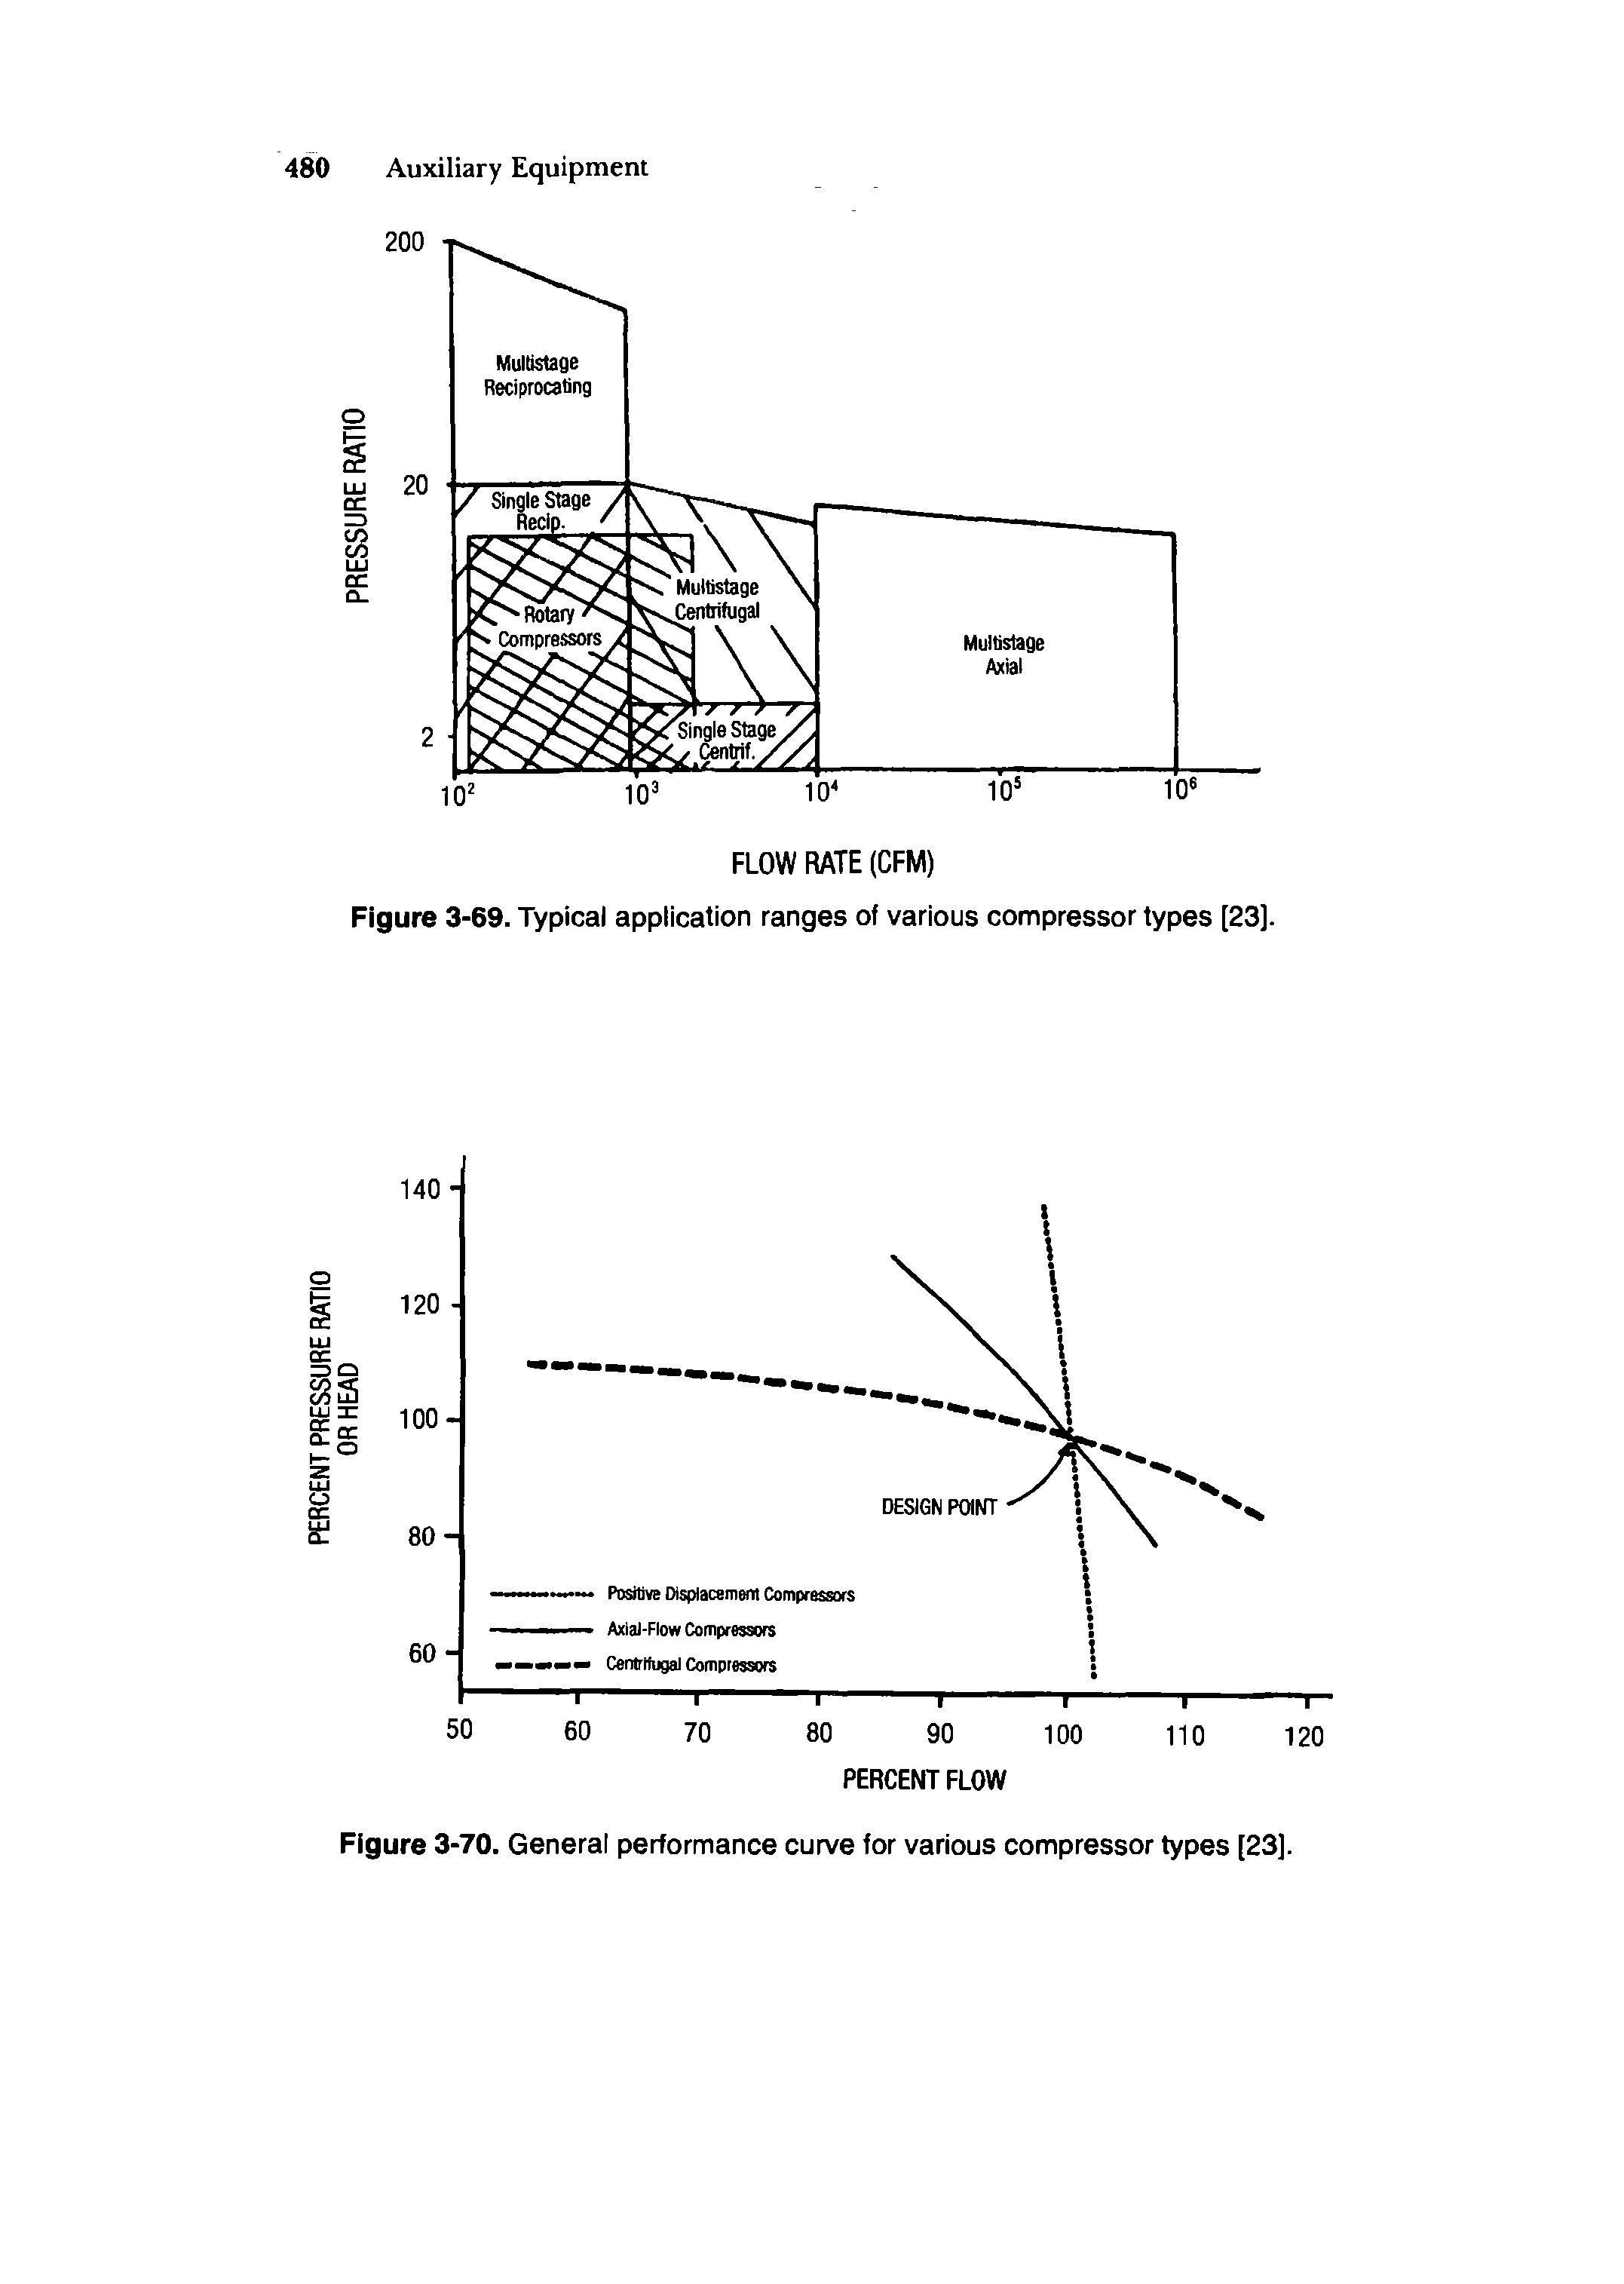 Figure 3-70. General performance curve for various compressor types [23].